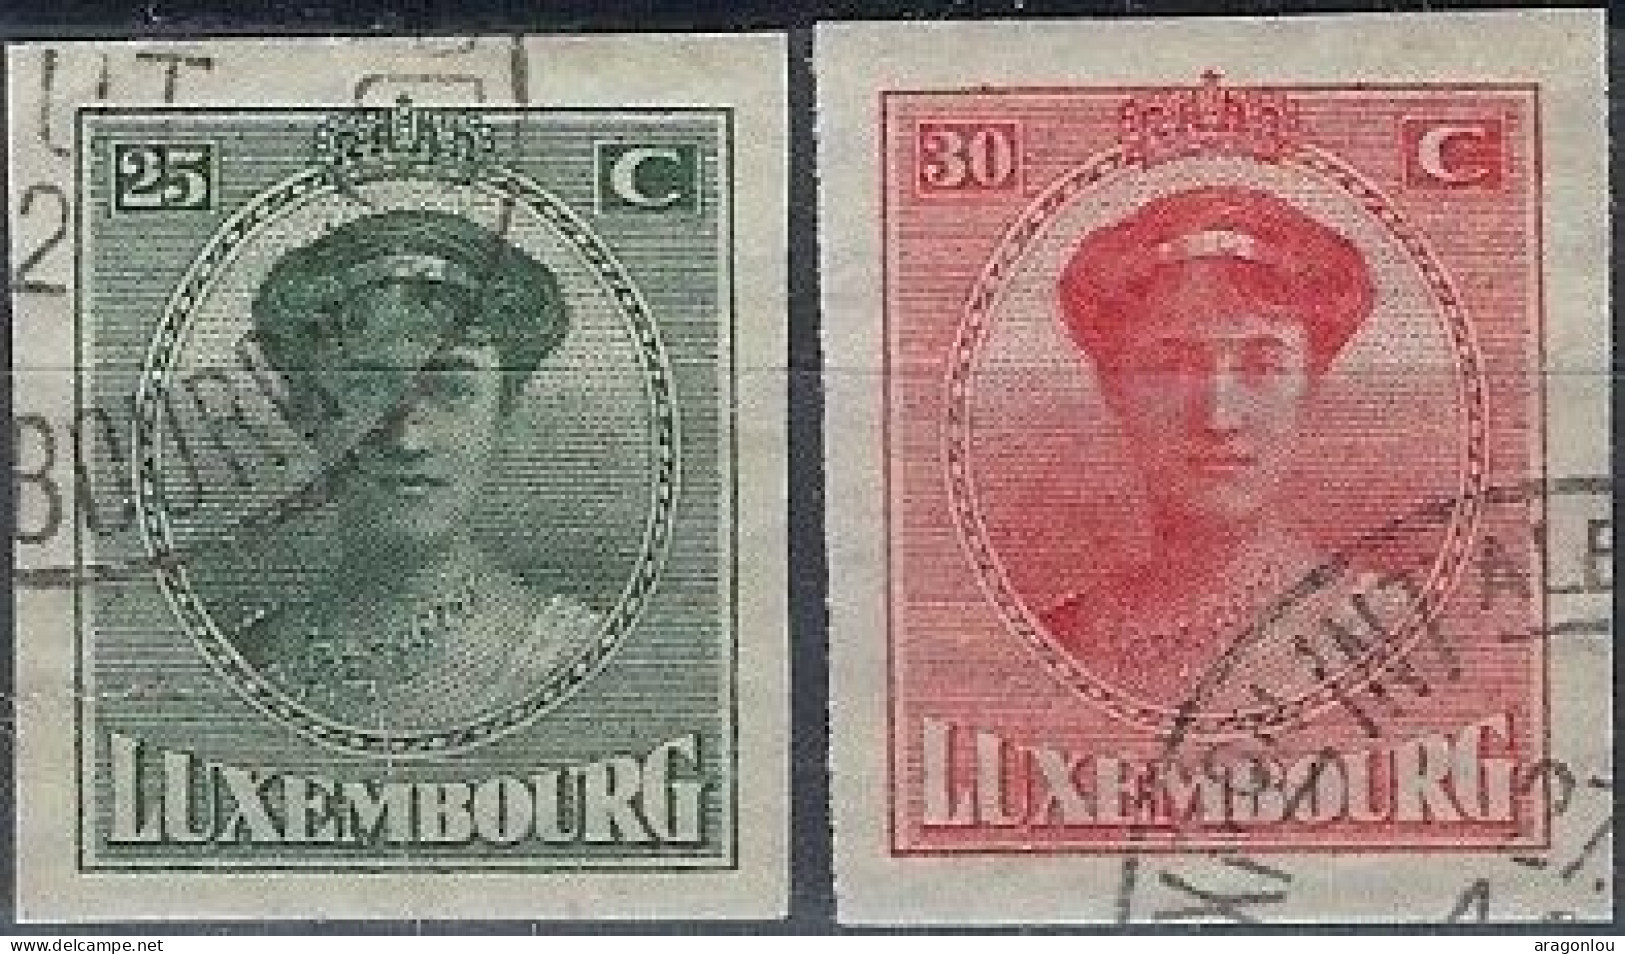 Luxembourg - Luxemburg -  Timbre  Série Charlotte   °   VC. 15,- - 1921-27 Charlotte Frontansicht